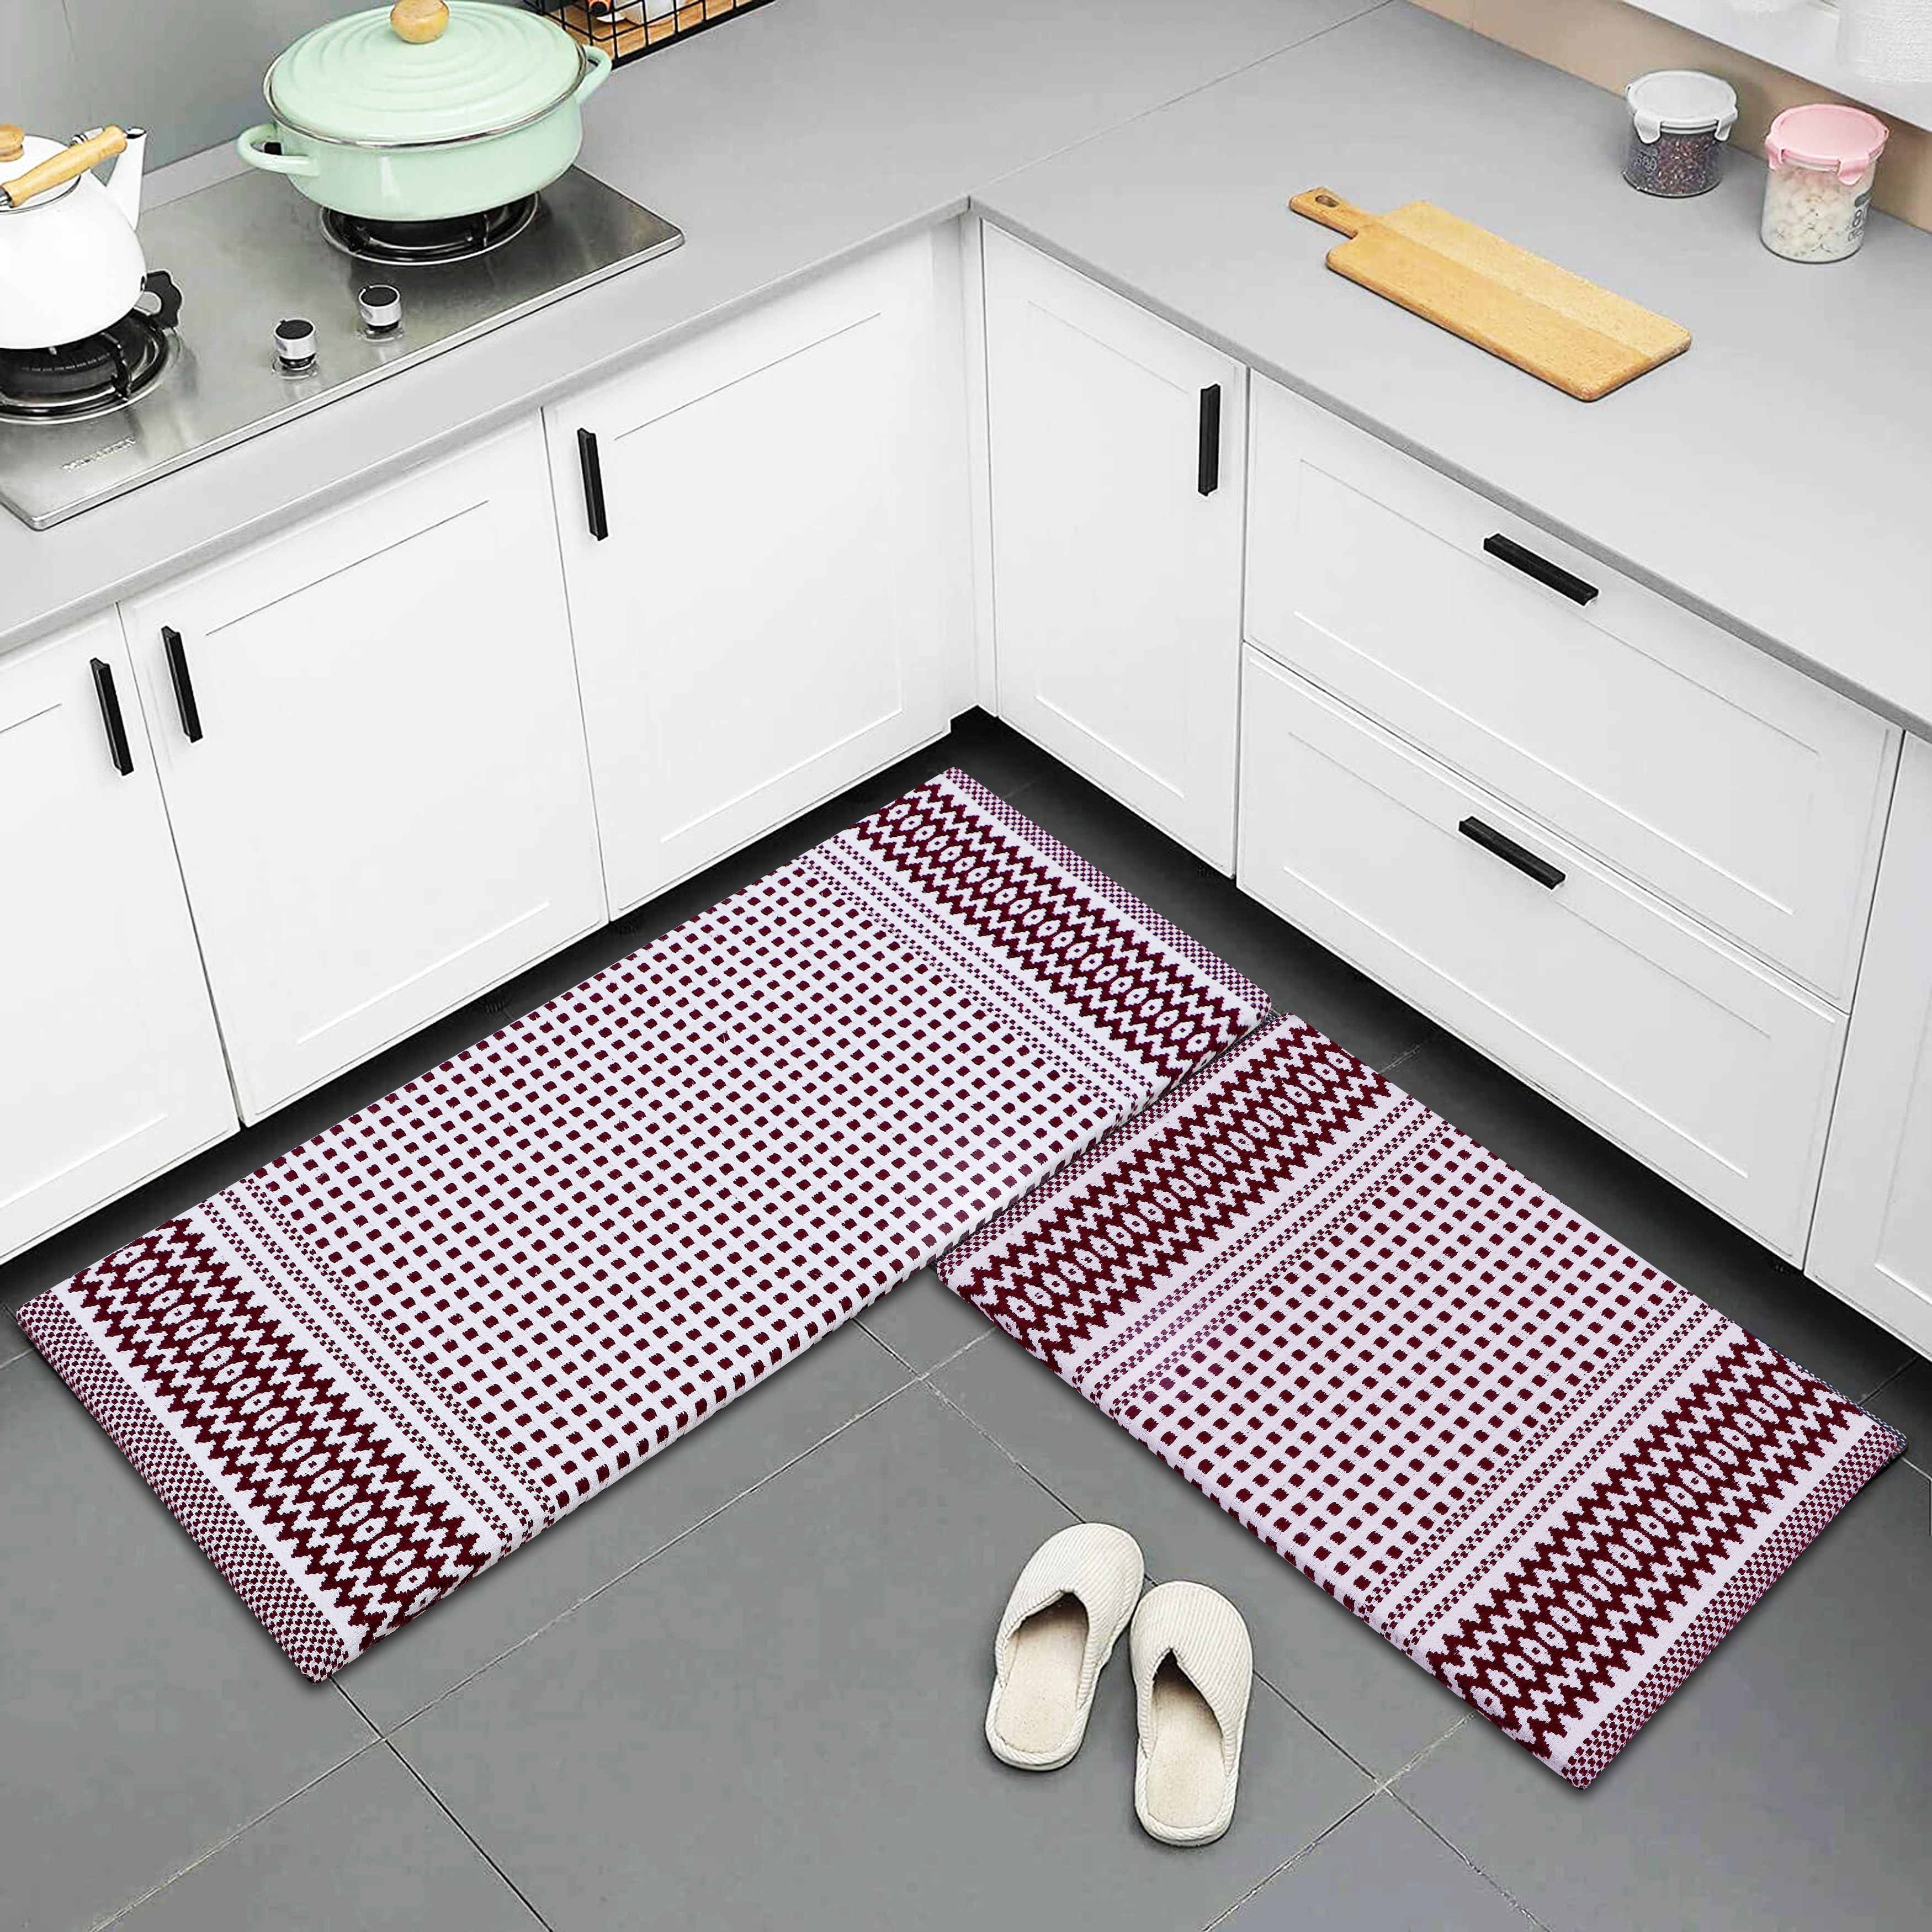 https://ak1.ostkcdn.com/images/products/is/images/direct/897a28476642c9cf88a0da9f67f35eb655a739f6/Anti-Fatigue-Standing-Cushioned-Kitchen-Bath-Mats-%5BSet-of-2%5D-%7C-Woven-Cotton-%7C-Waterproof-%7C-Non-Slip-%7C-for-Office%2C-Sink%2C-Laundry.jpg